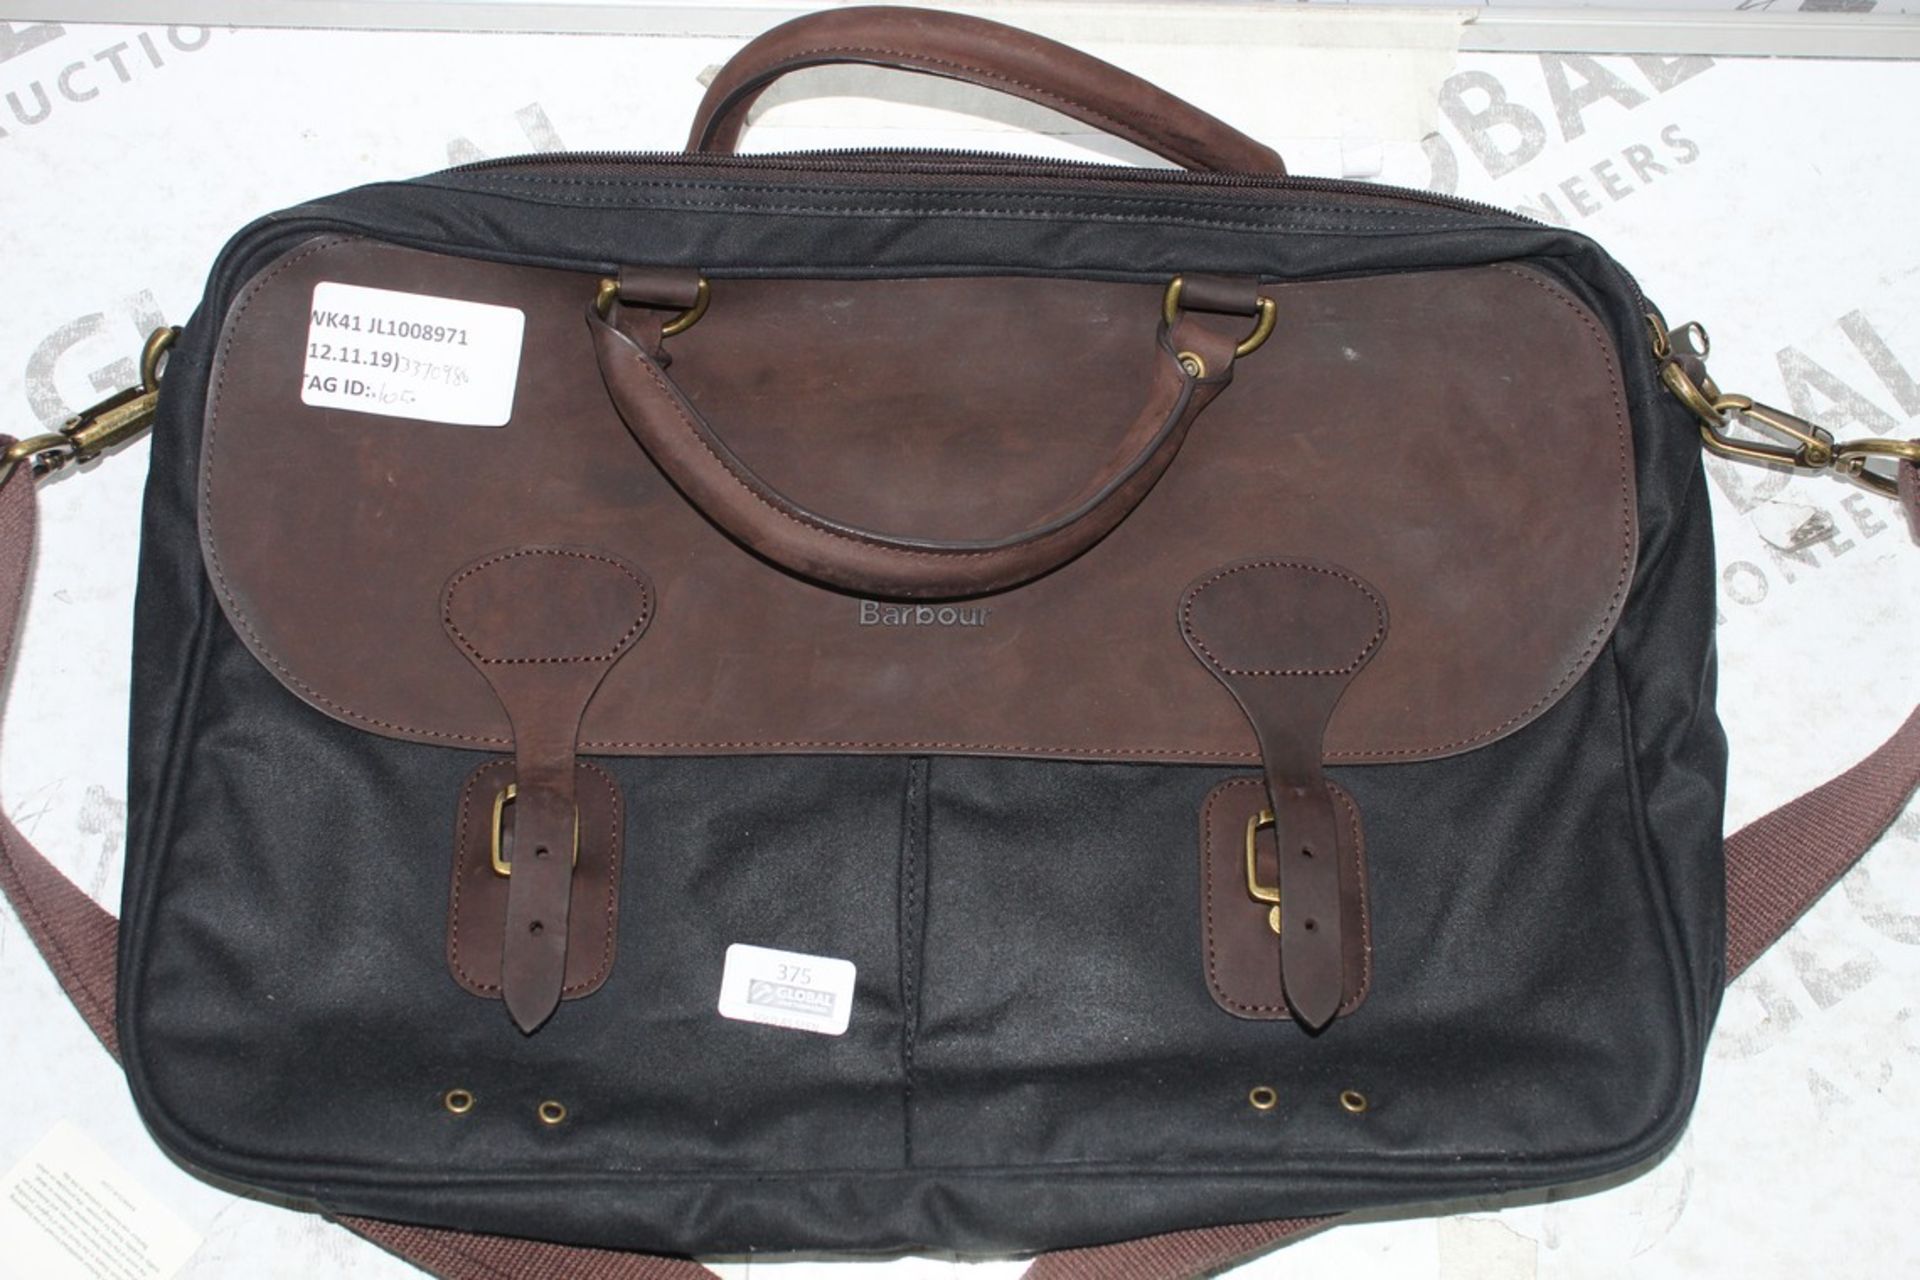 Barber International Wax Leather Laptop Bag RRP £105 (Pallet No 3370986) (Public Viewing and